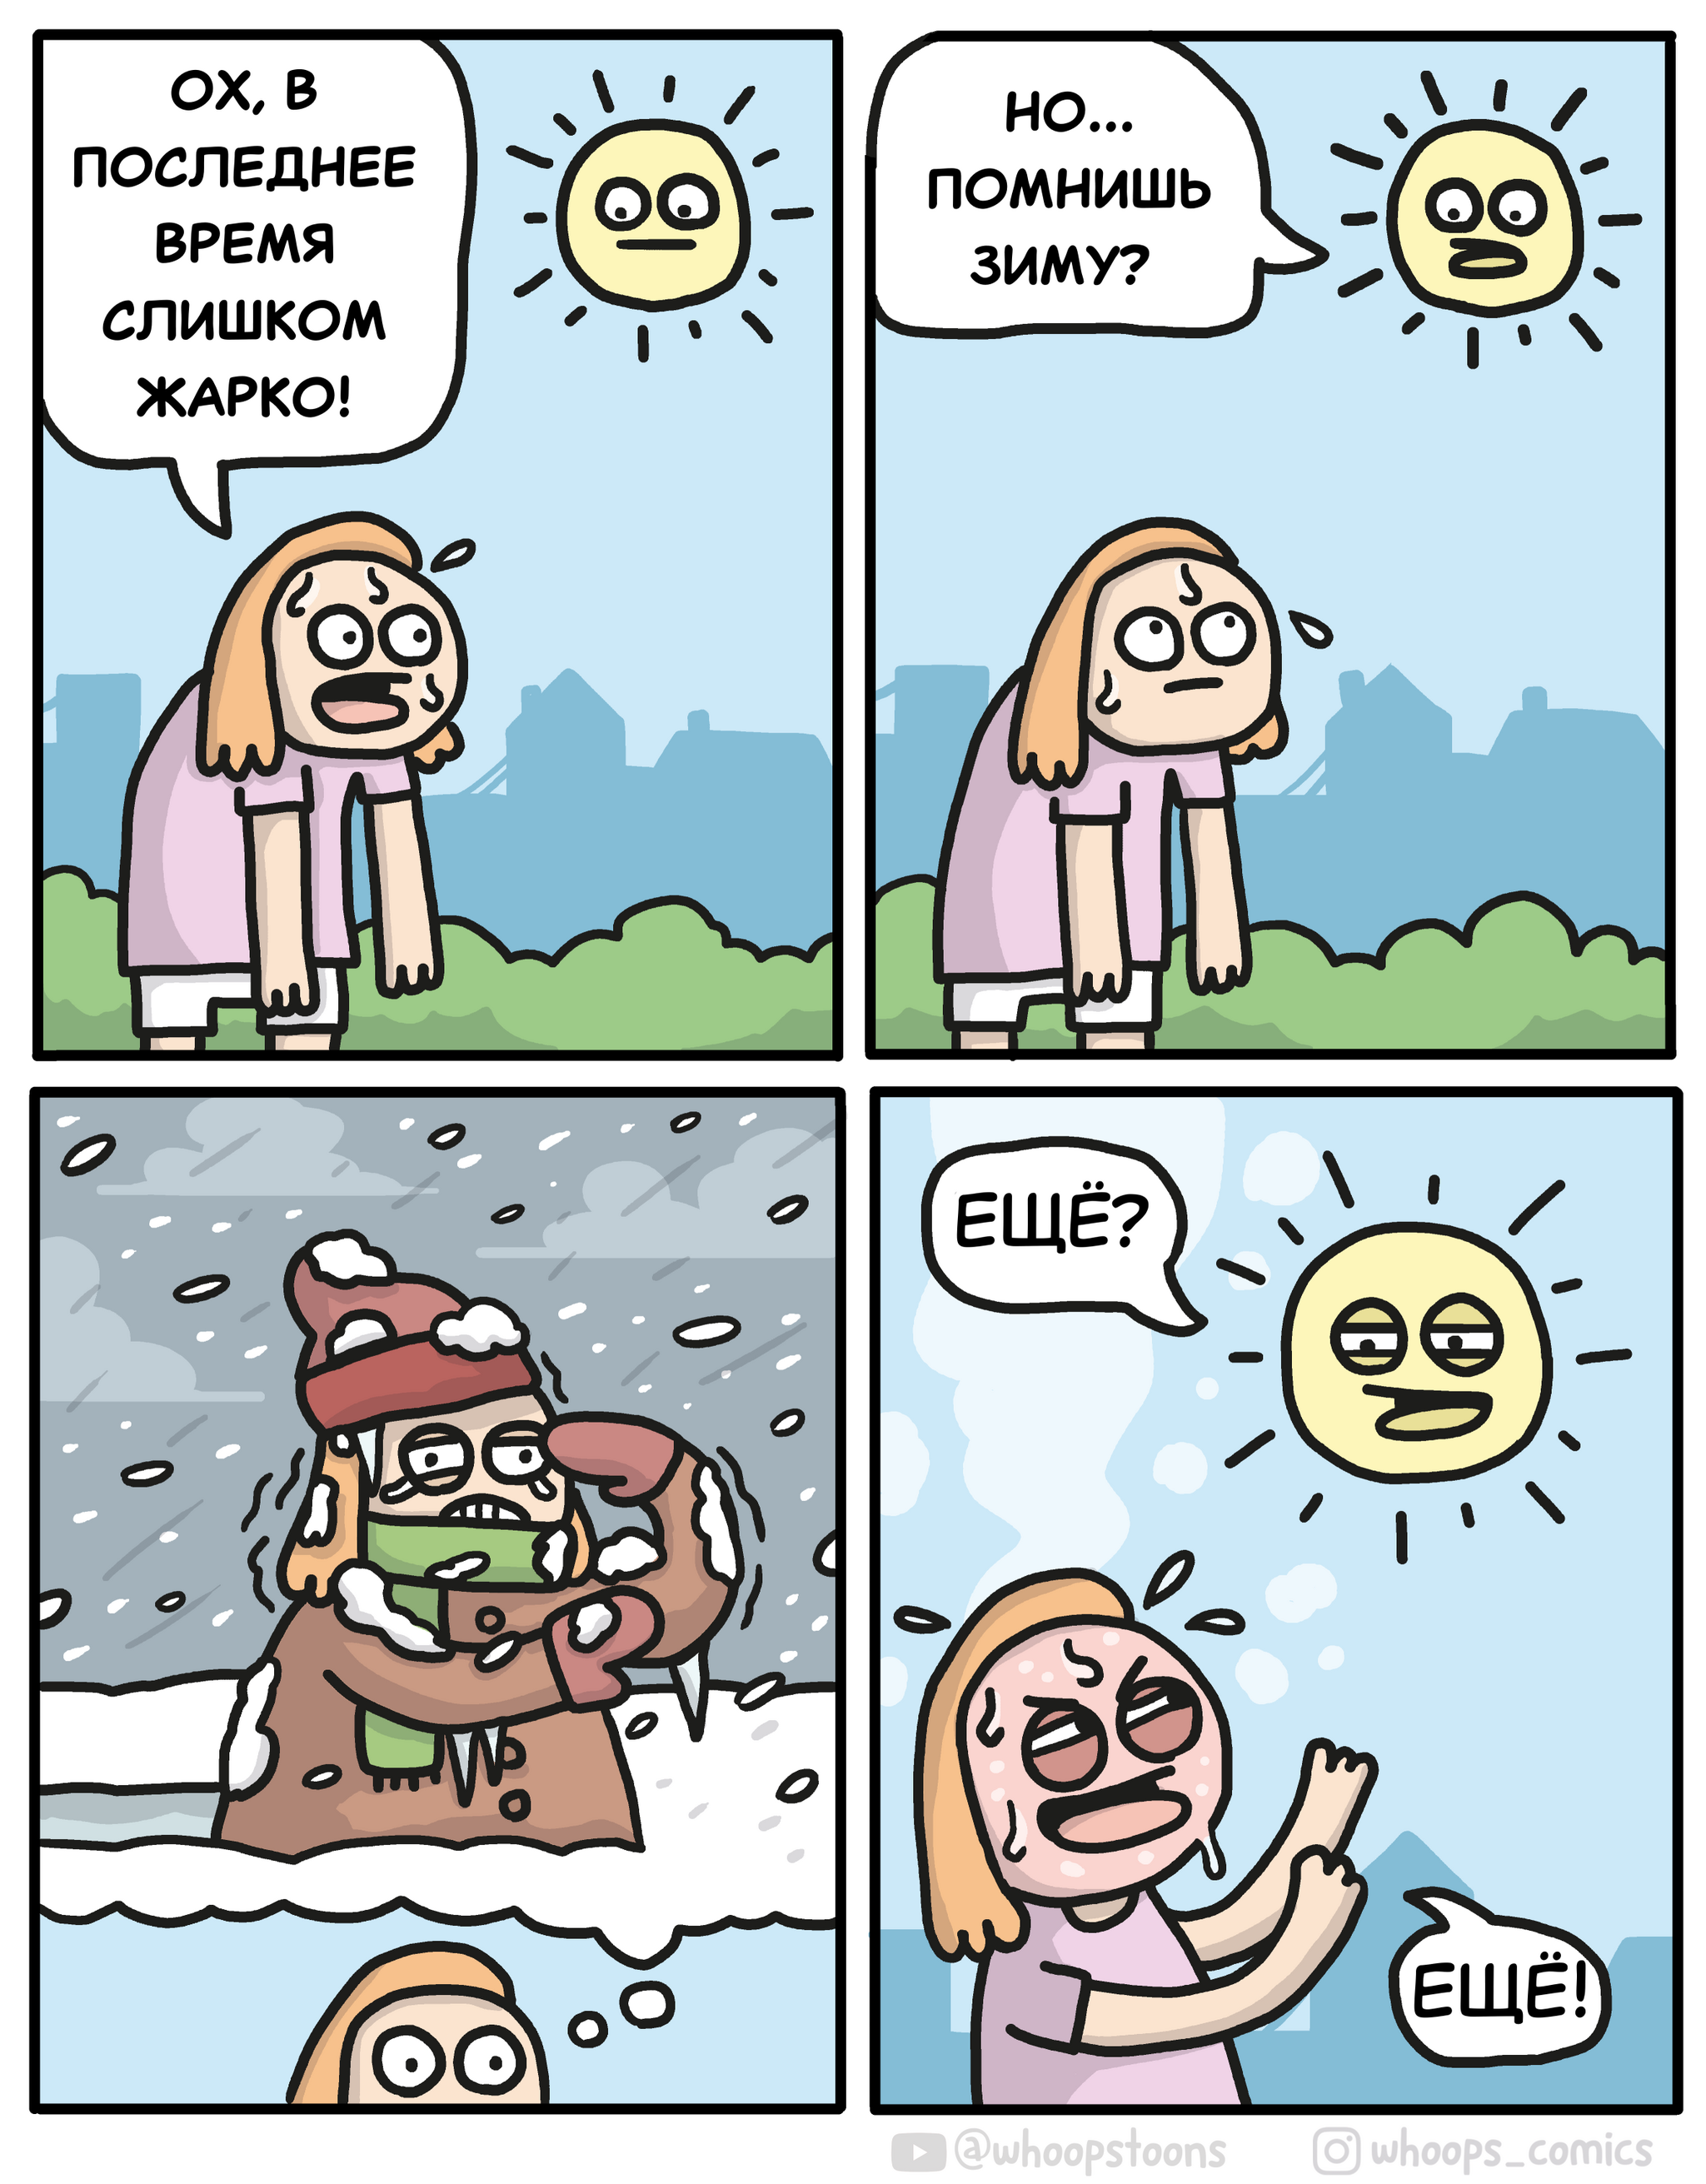 Do you remember winter? - My, Translated by myself, Comics, Humor, Summer, Winter, Whoopscomics